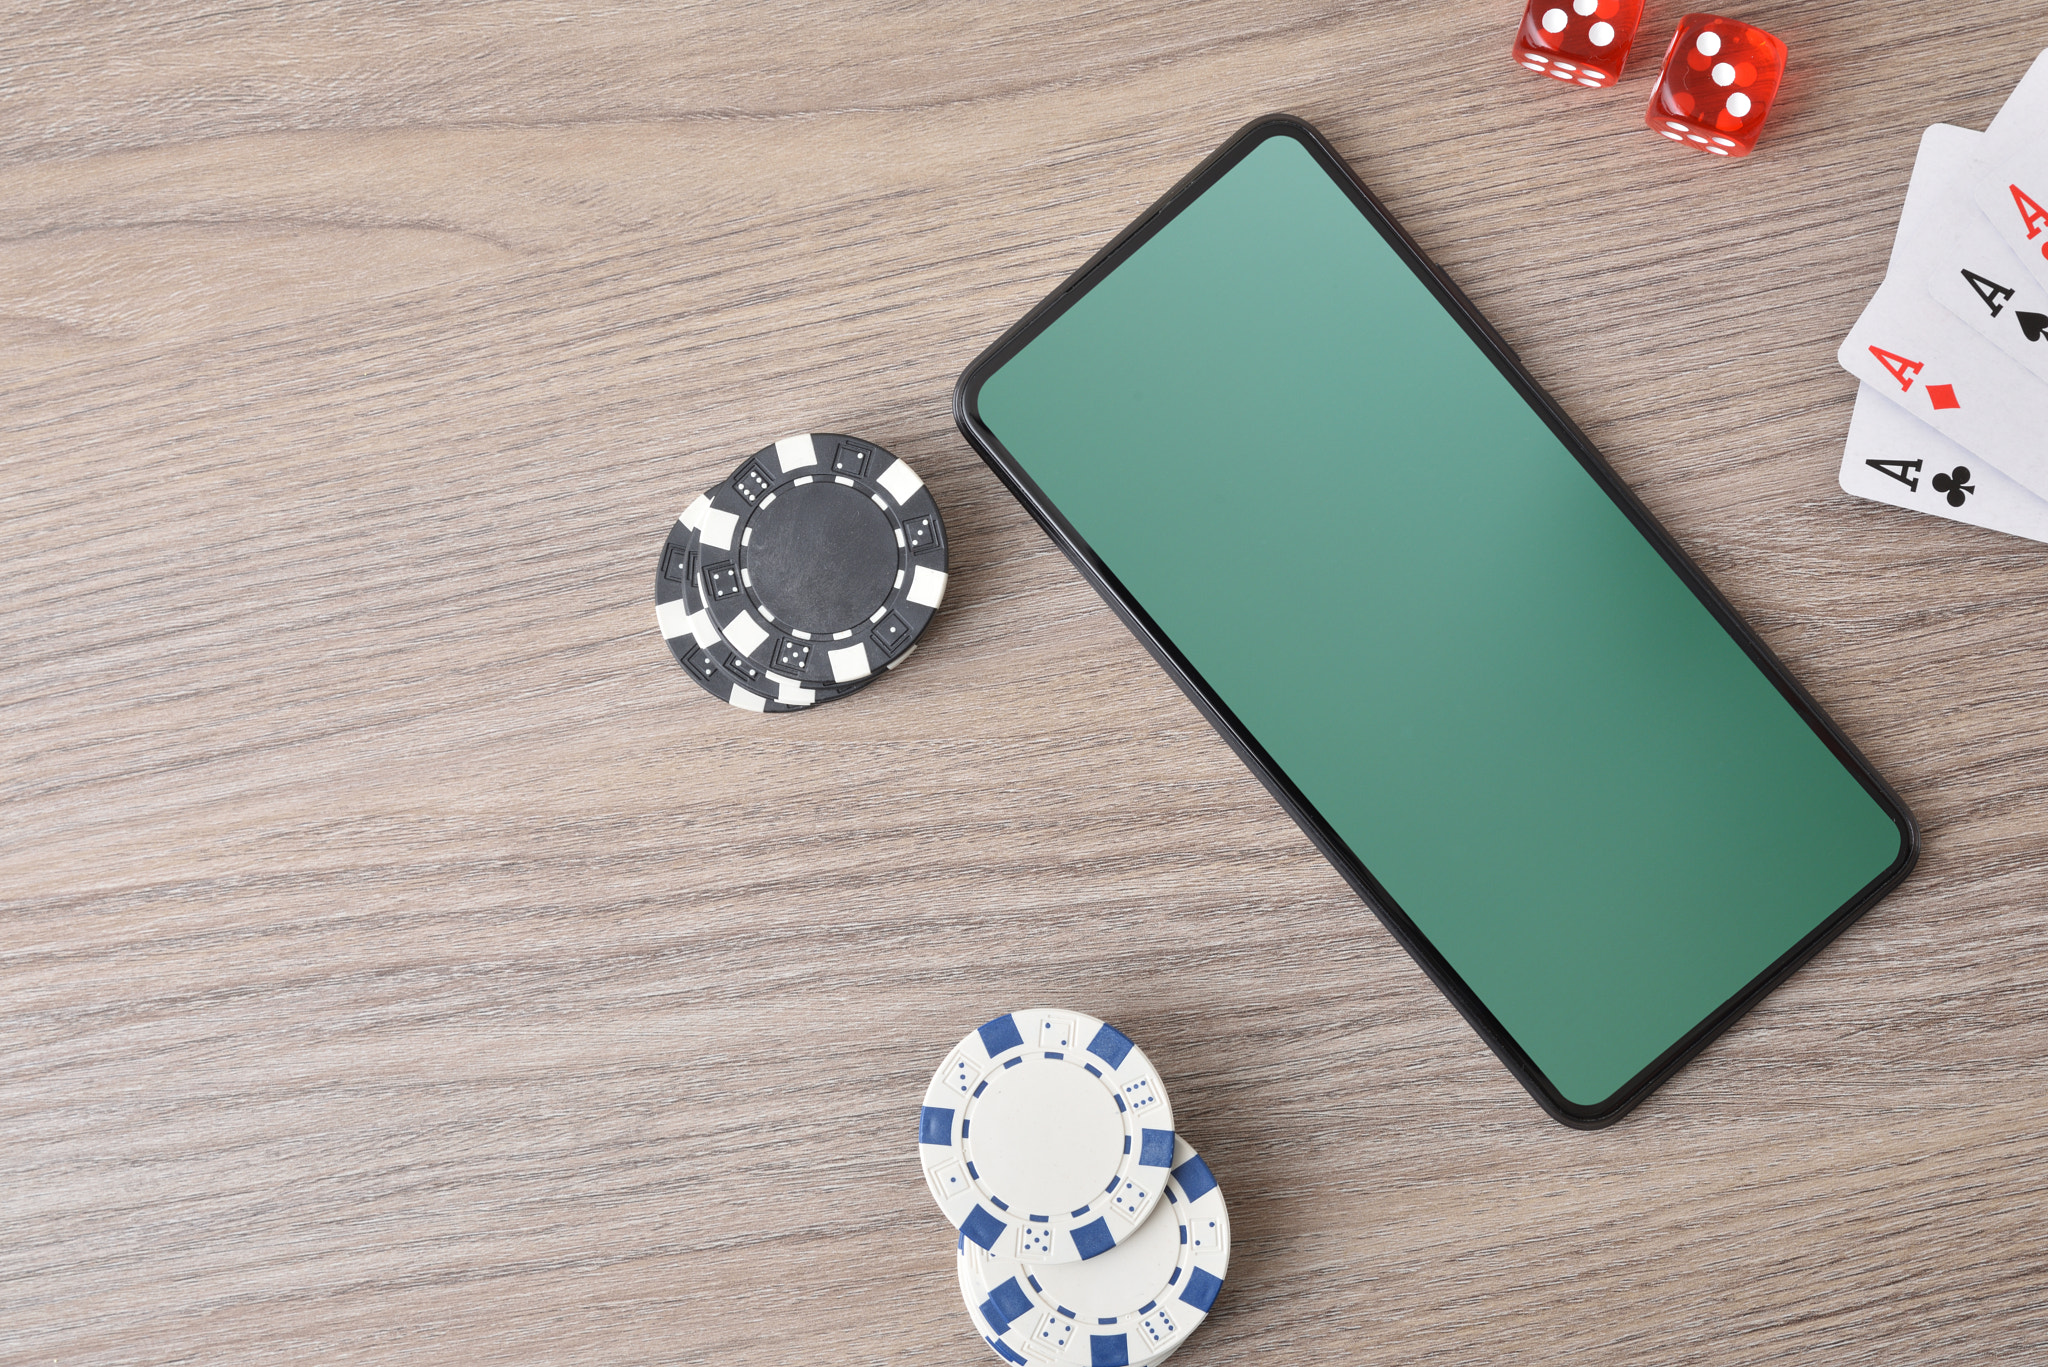 Virtual casino game with smartphone on table and objects around